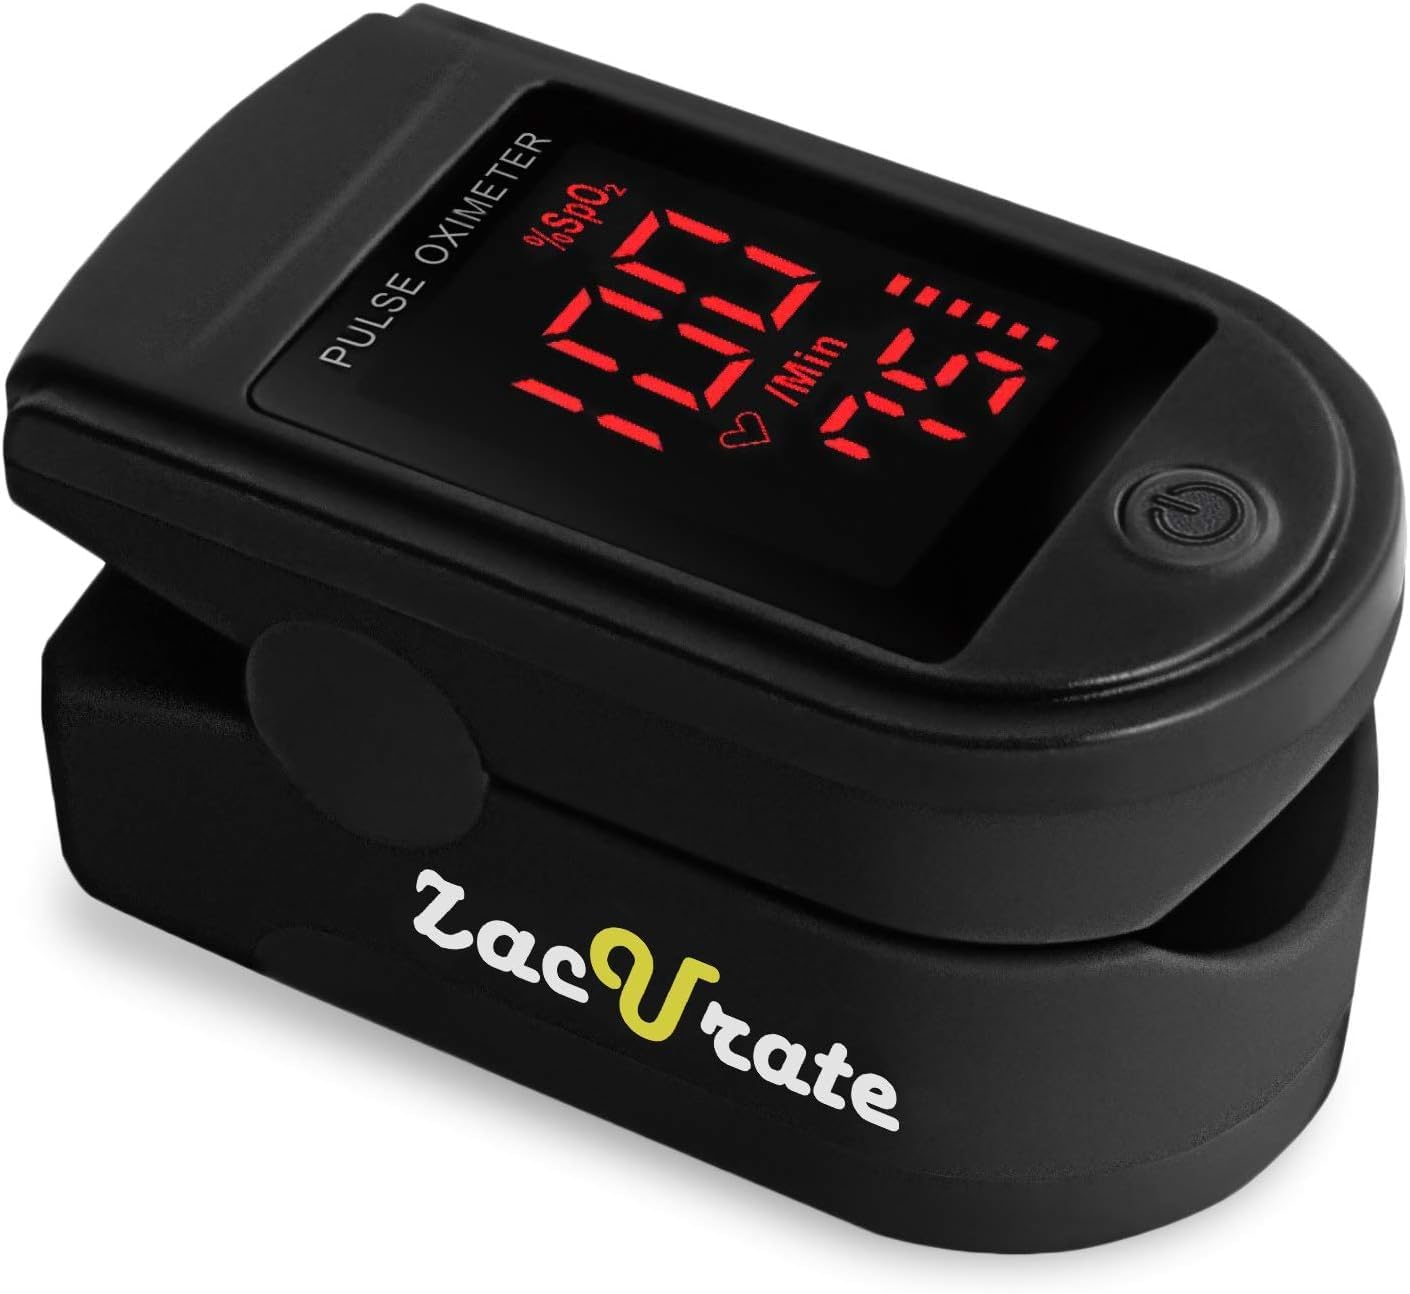 Best Pulse Oximeter: Top 5 Picks for Monitoring Your Health